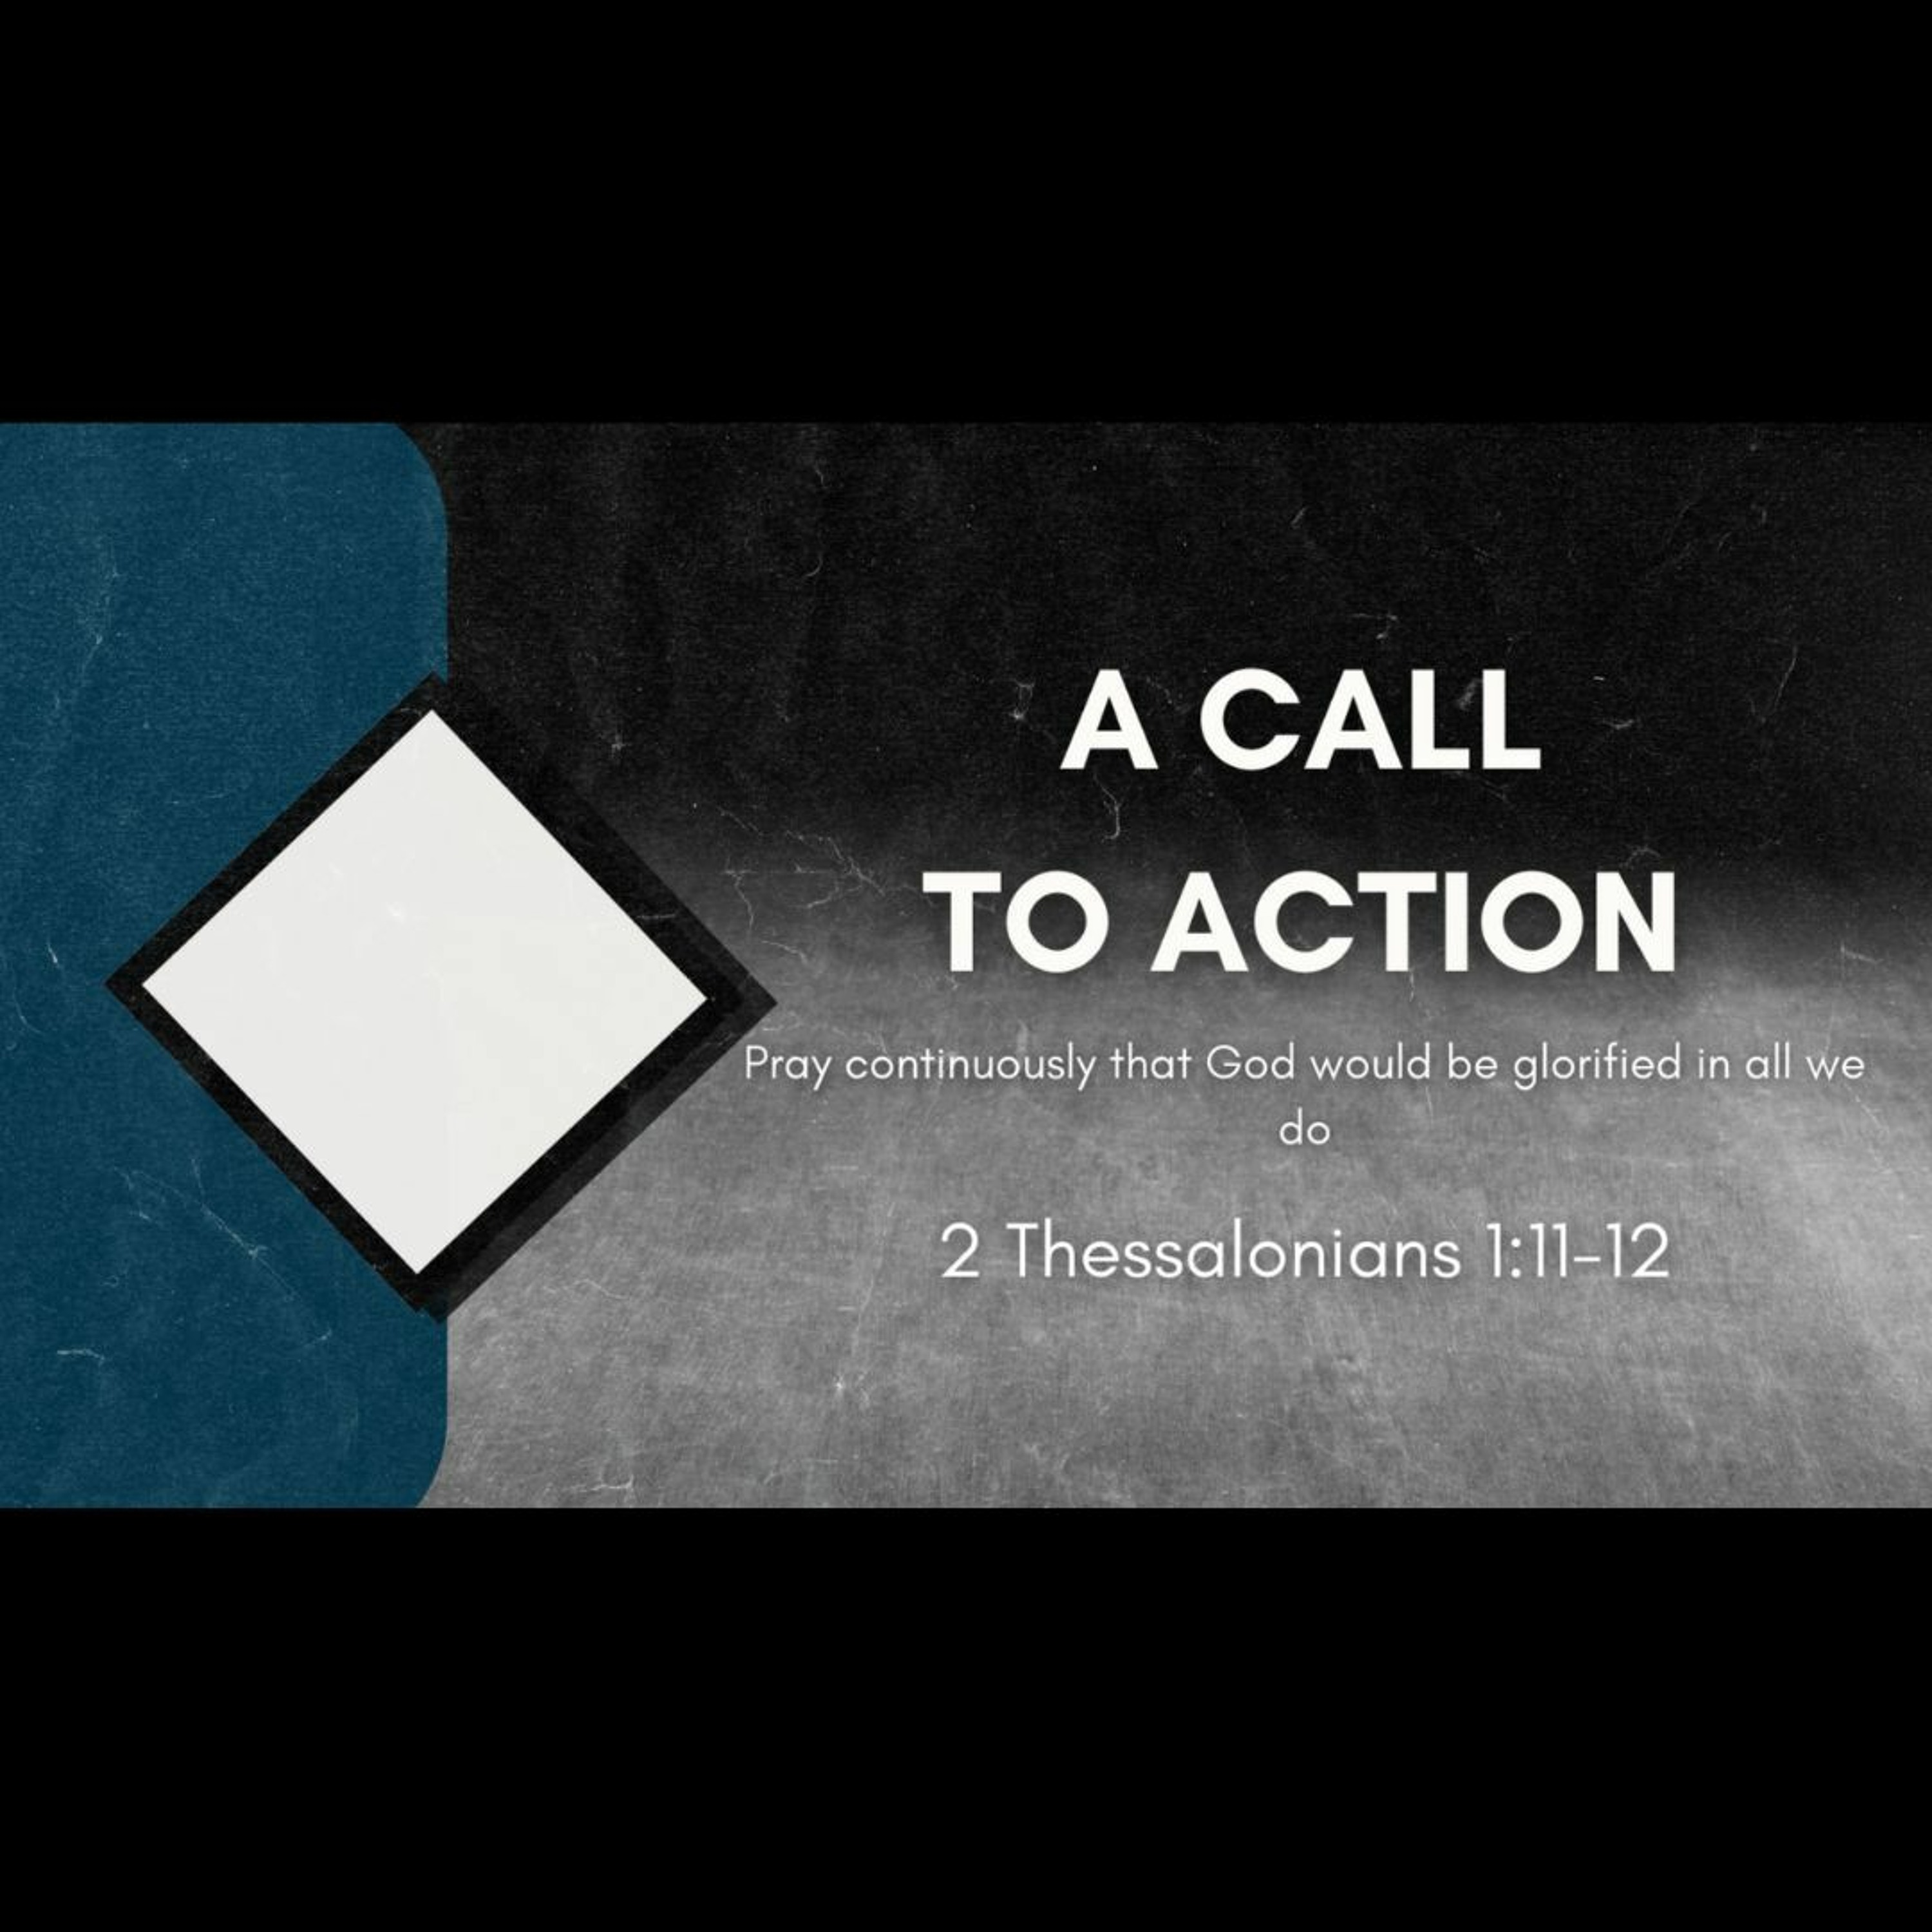 A Call to Action (2 Thessalonians 1:11-12)